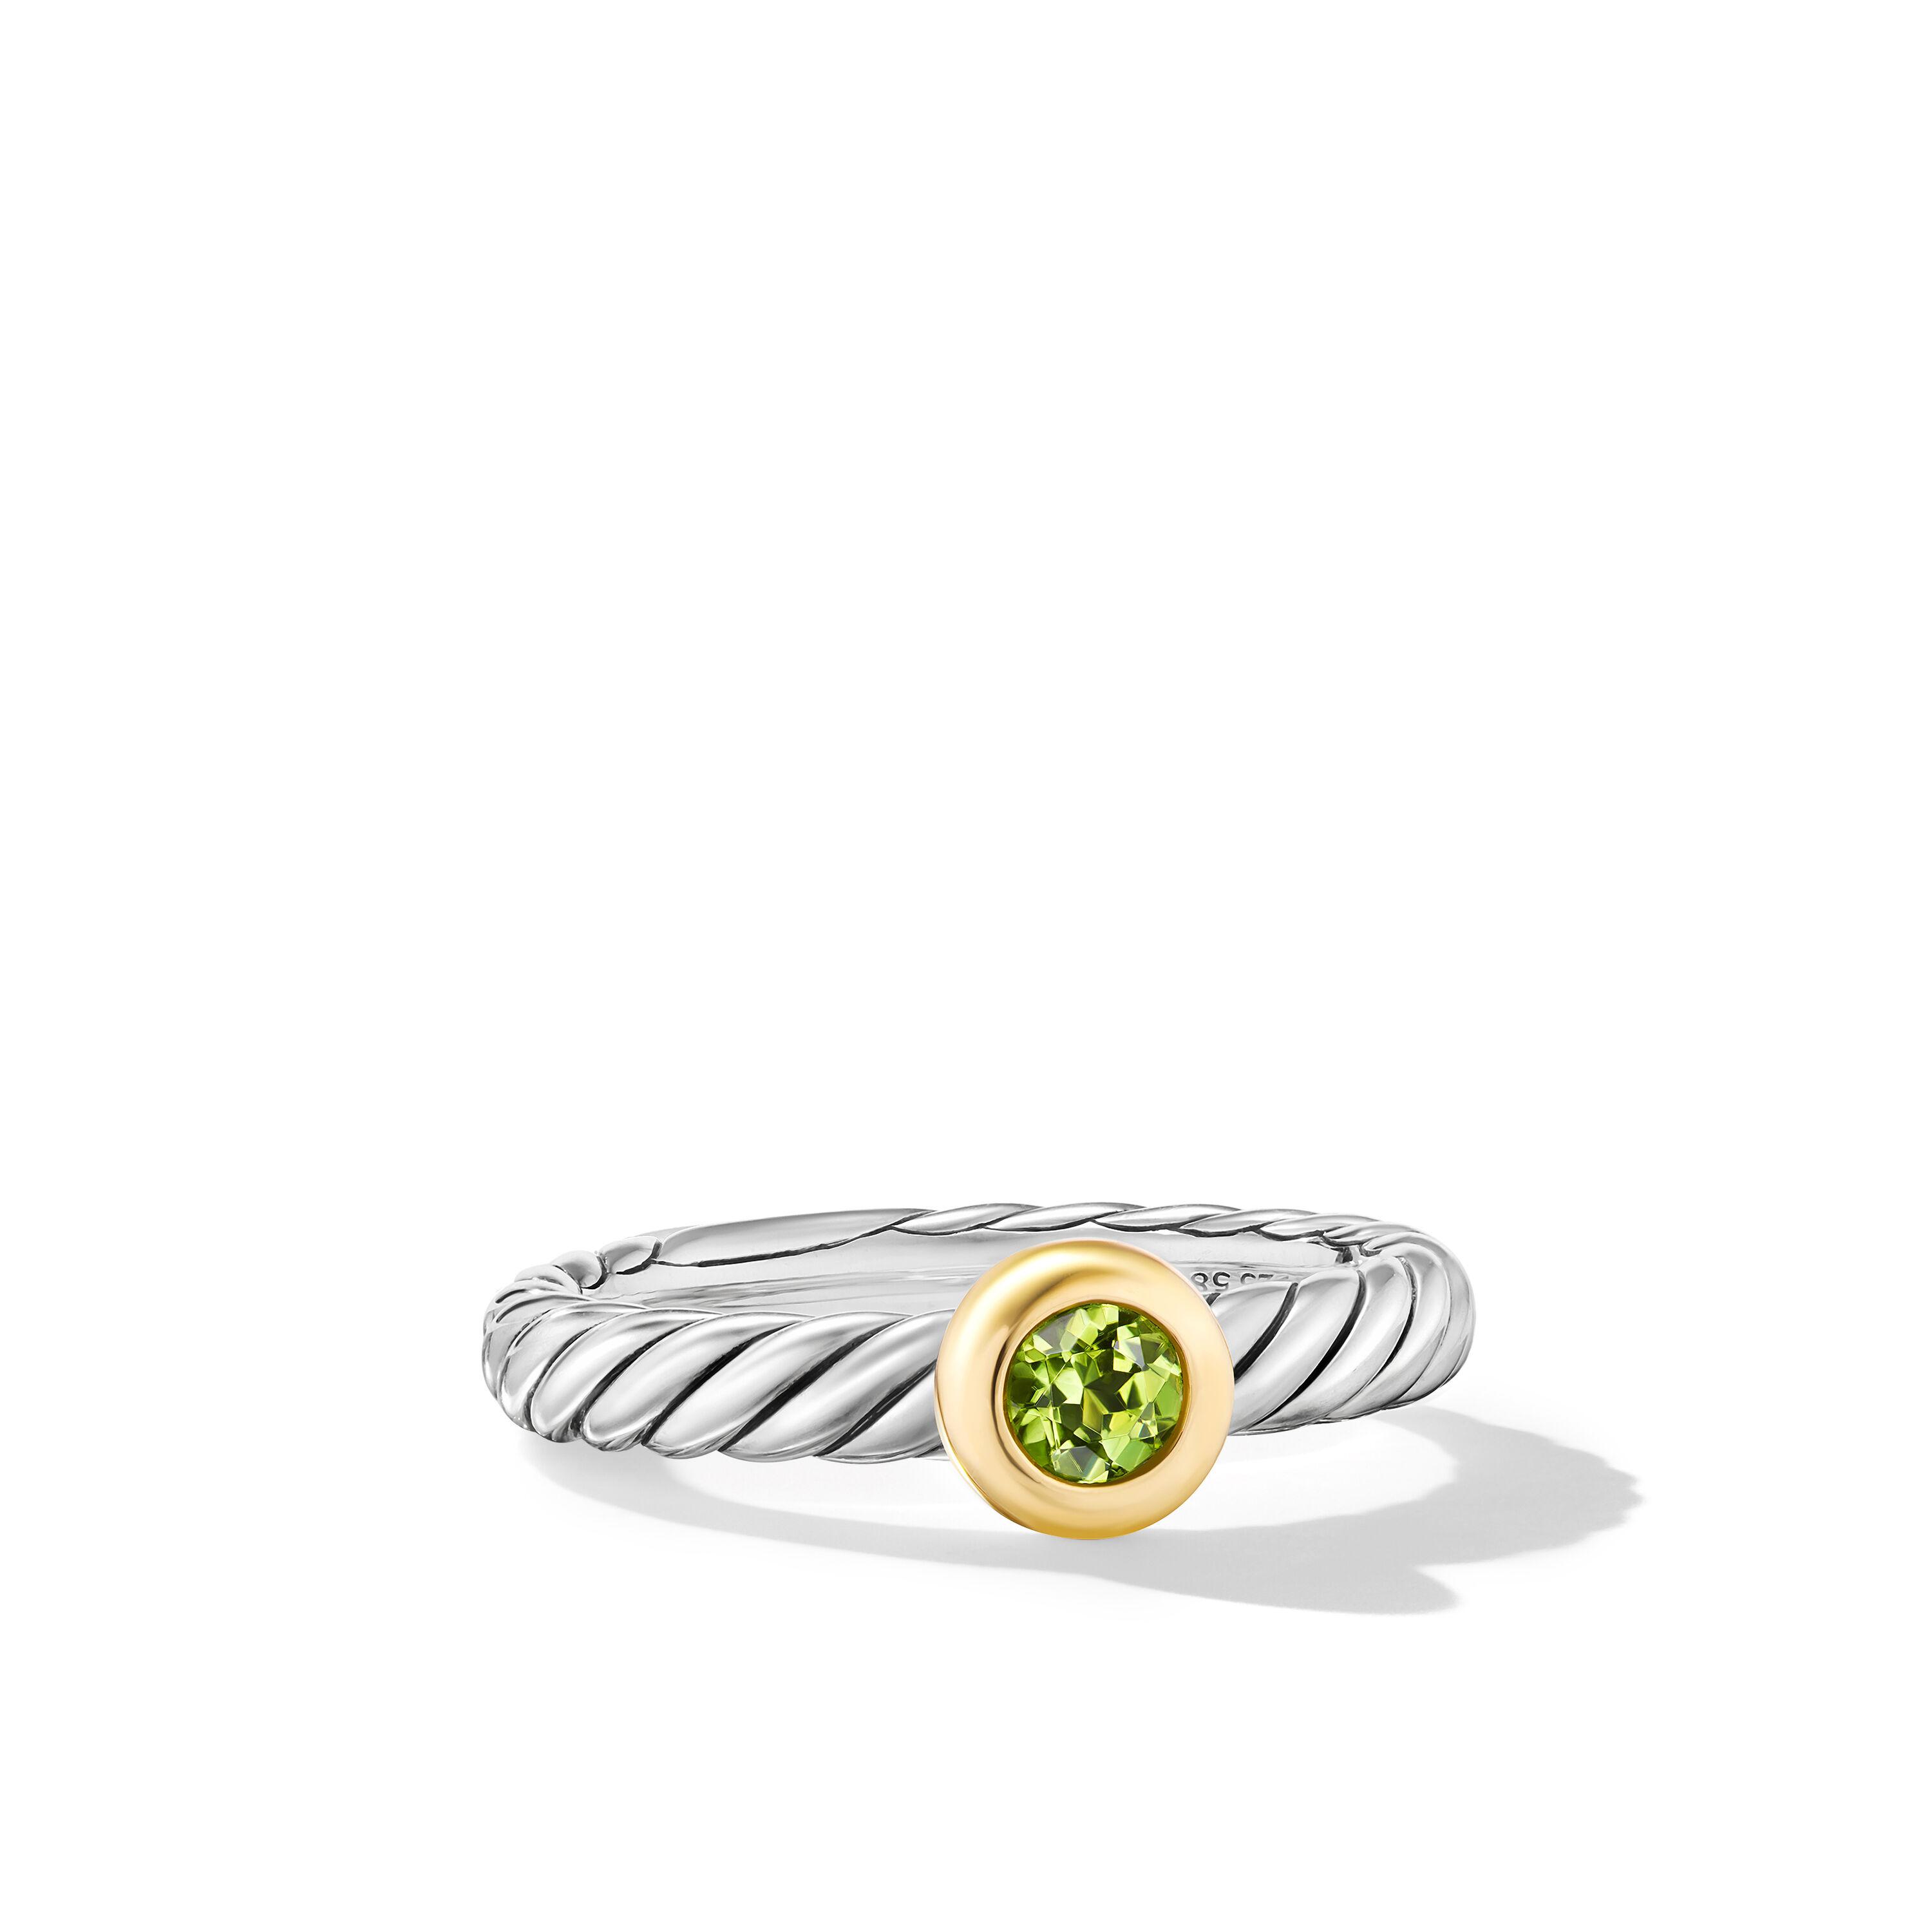 David Yurman Petite Cable Ring in Sterling Silver with 14K Yellow Gold and Peridot, Size 6